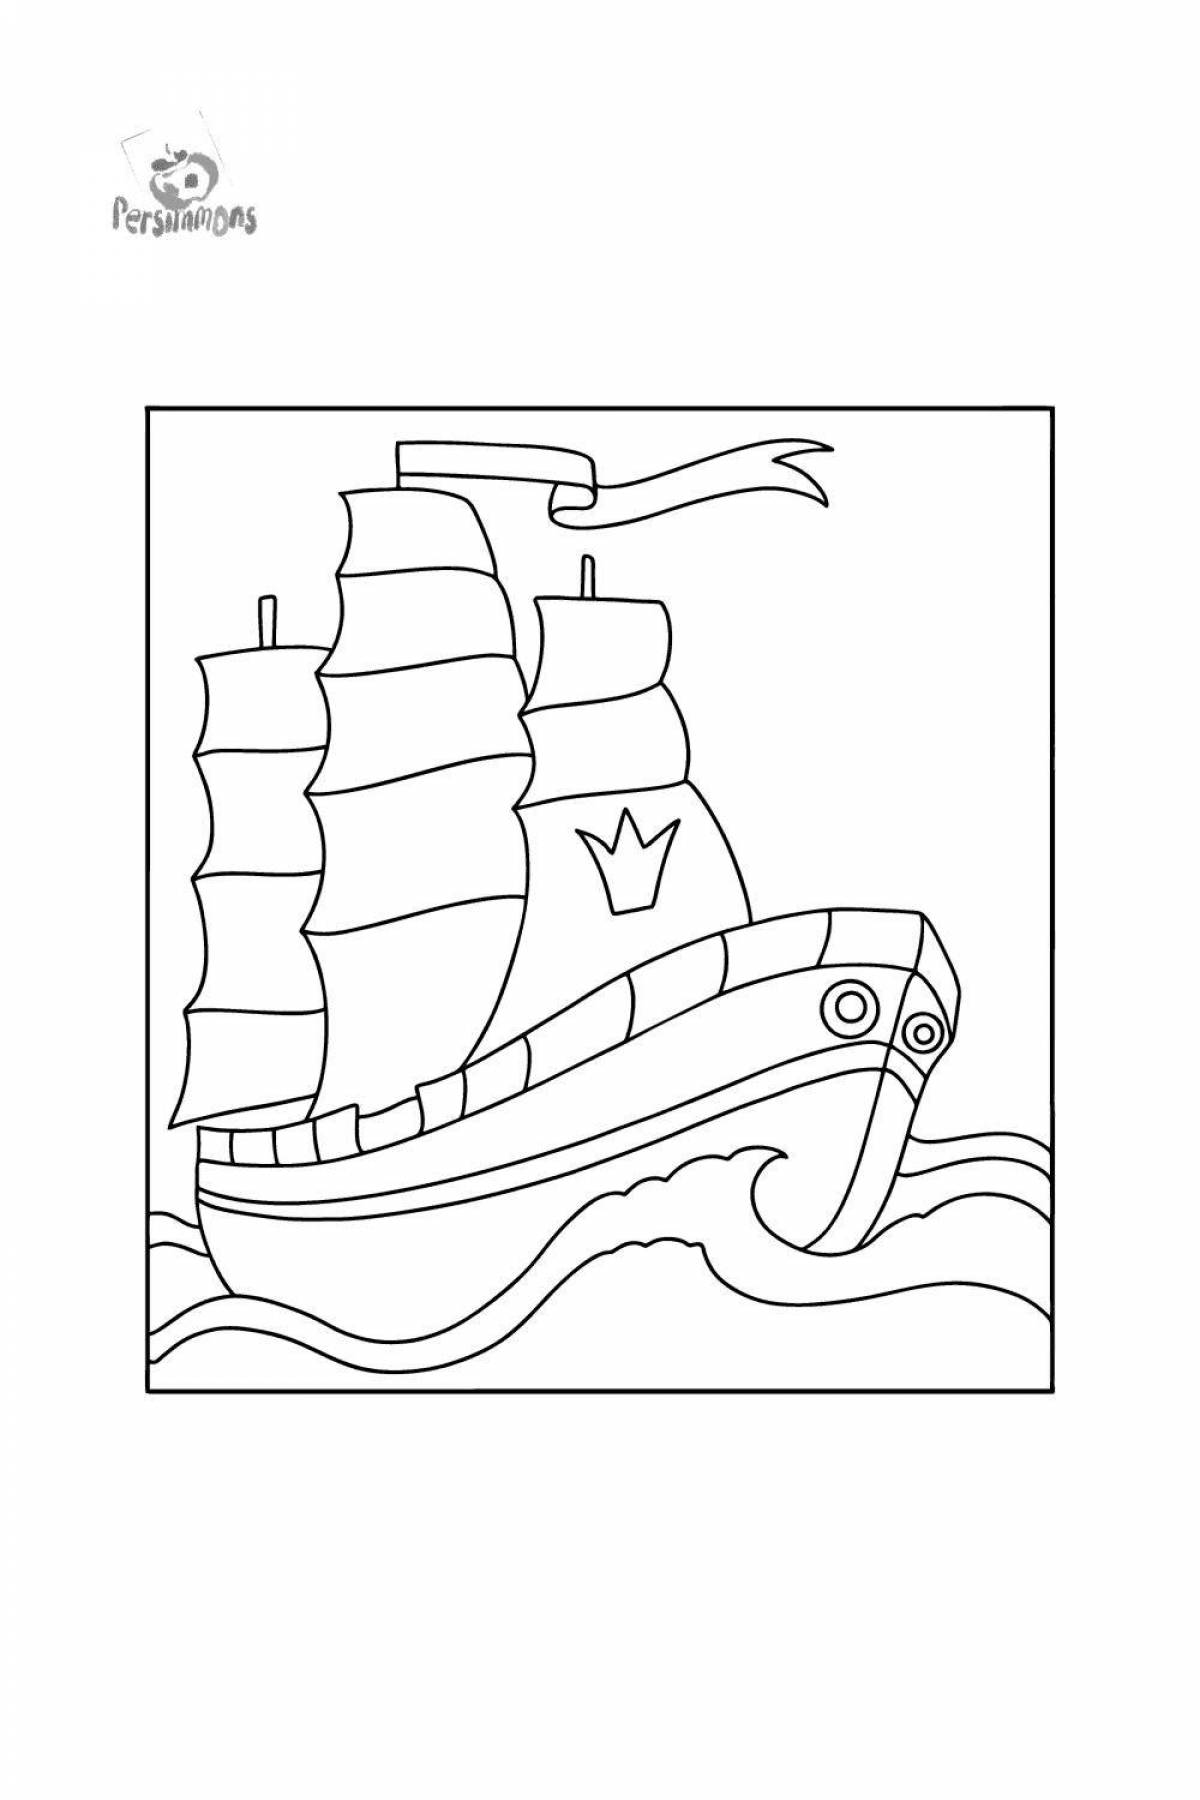 Coloring amazing ship by numbers